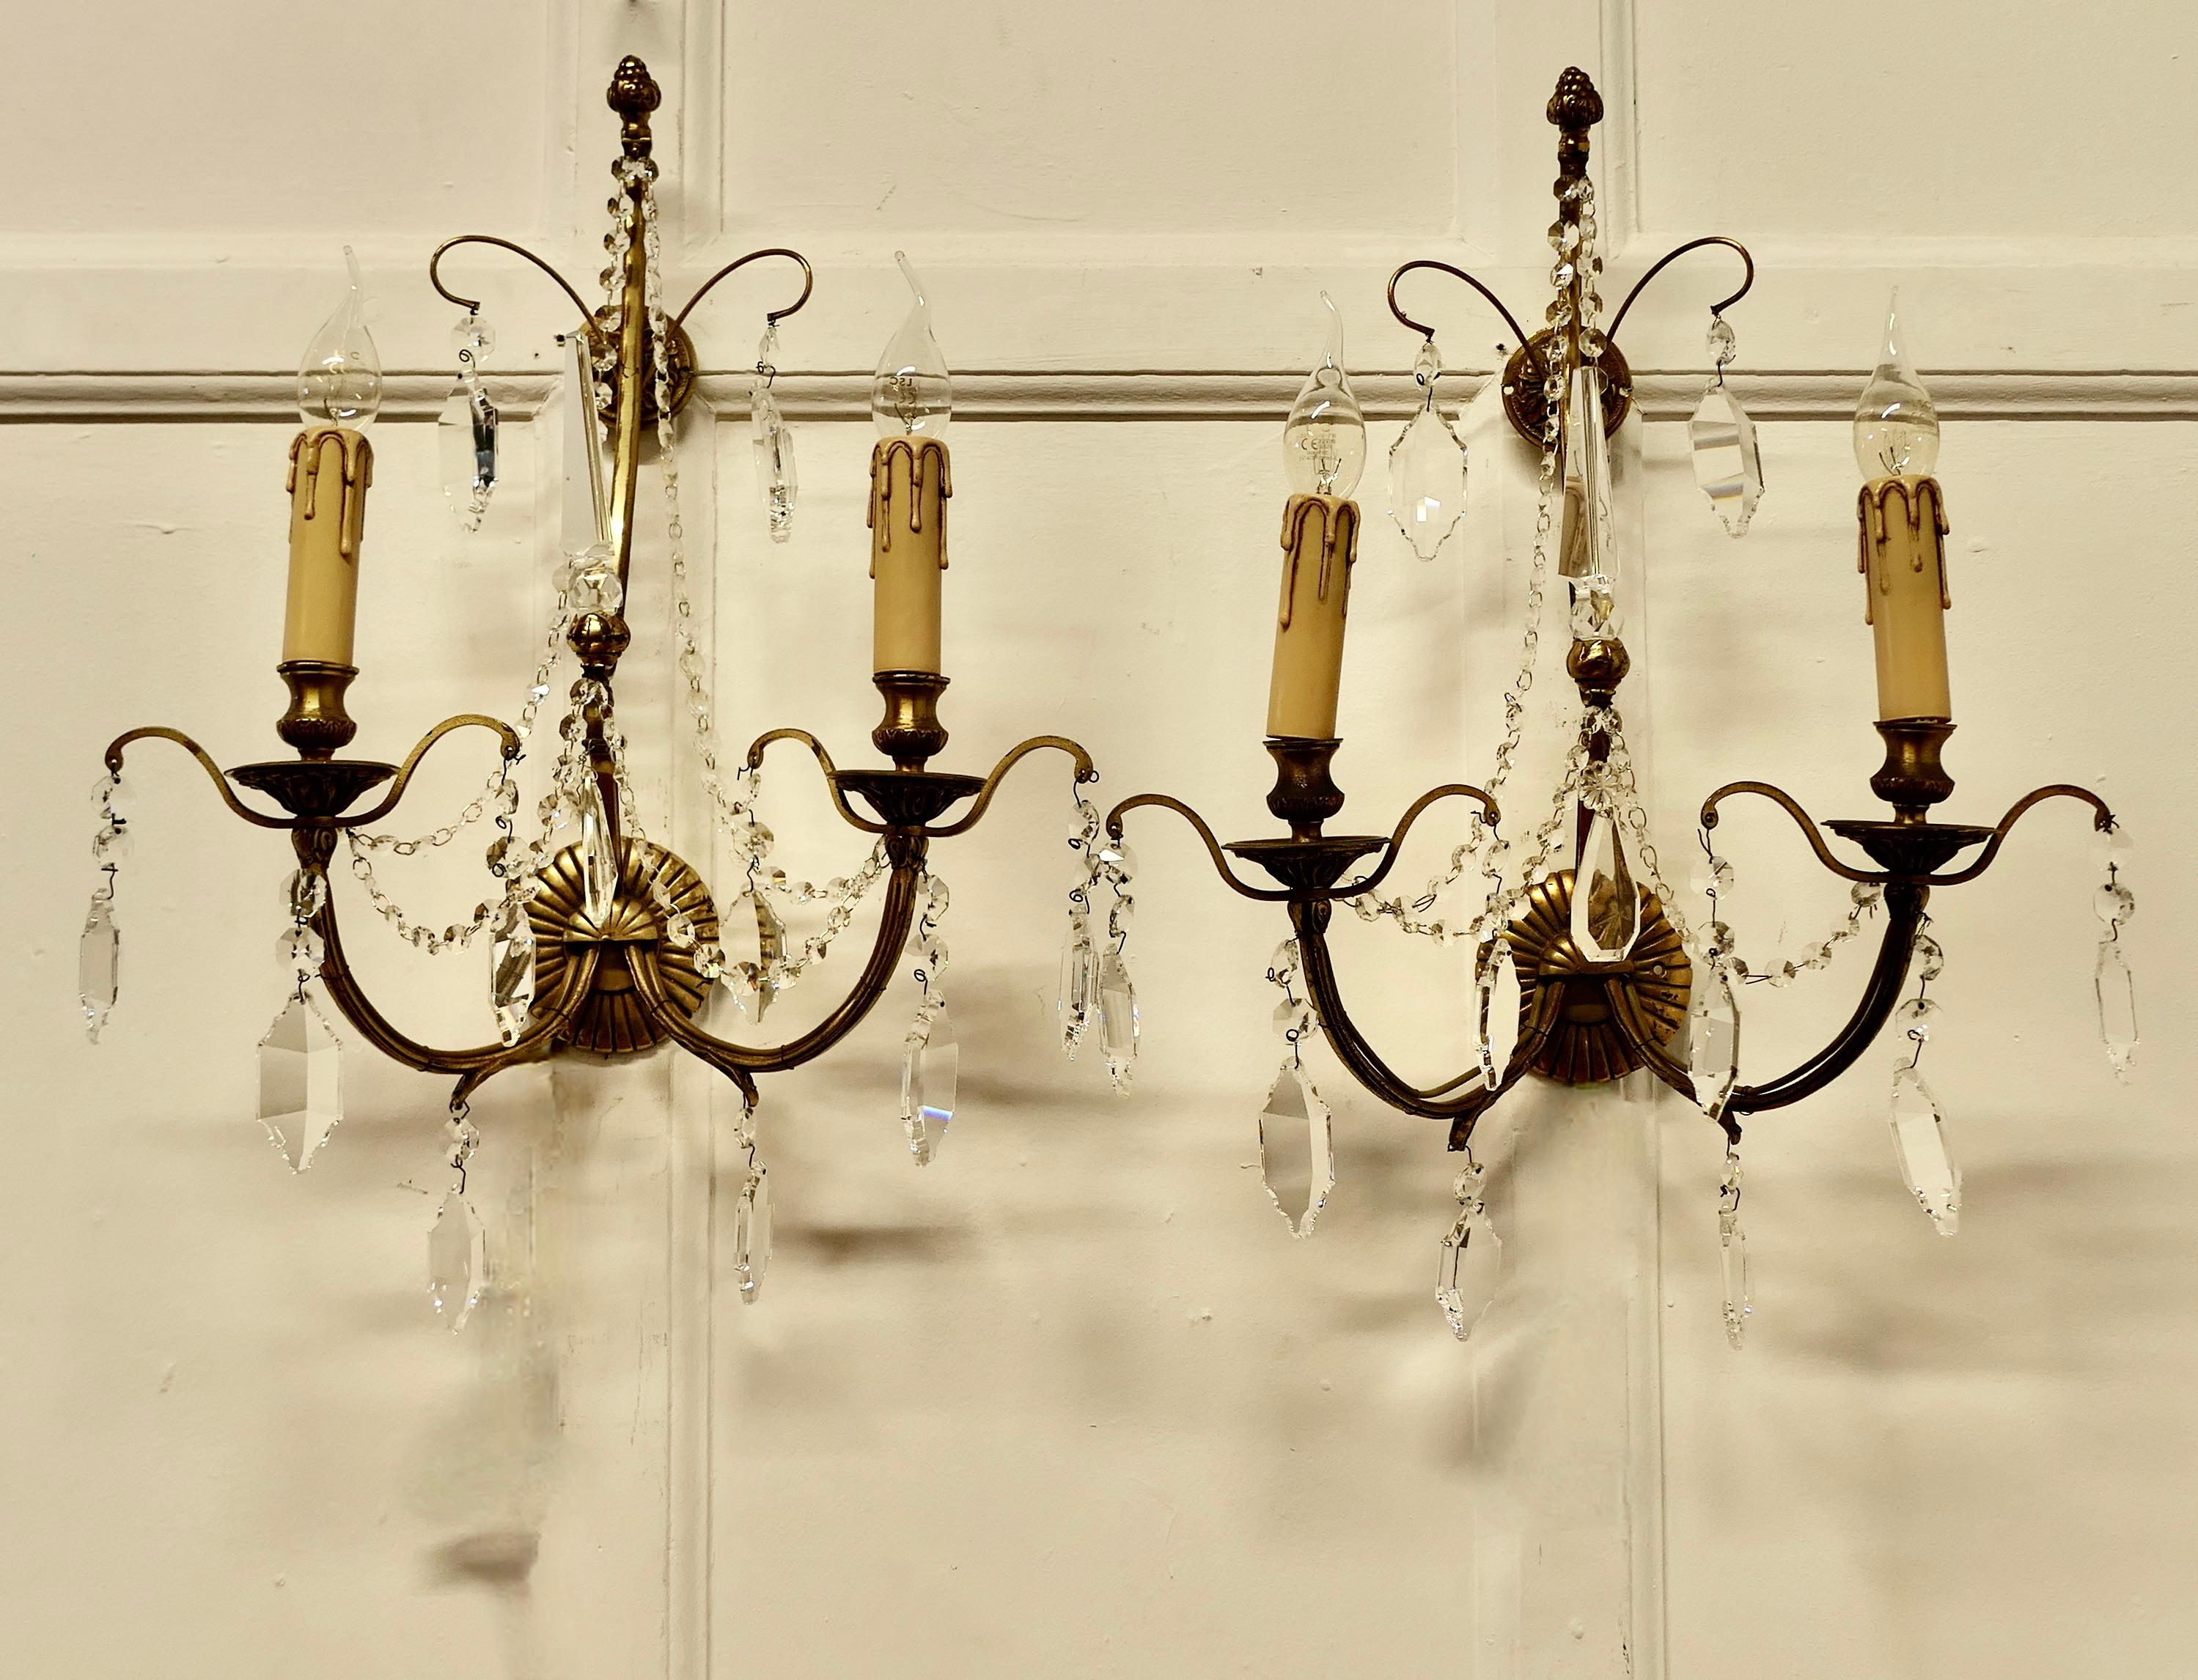 A Magnificent Pair of French Wall Chandeliers

This is a superb pair of twin sconce wall lights,  the lights are made in brass, curled into branches, they are hung with crystal pendants and chains

All creating a lovely sparkle when electrified with